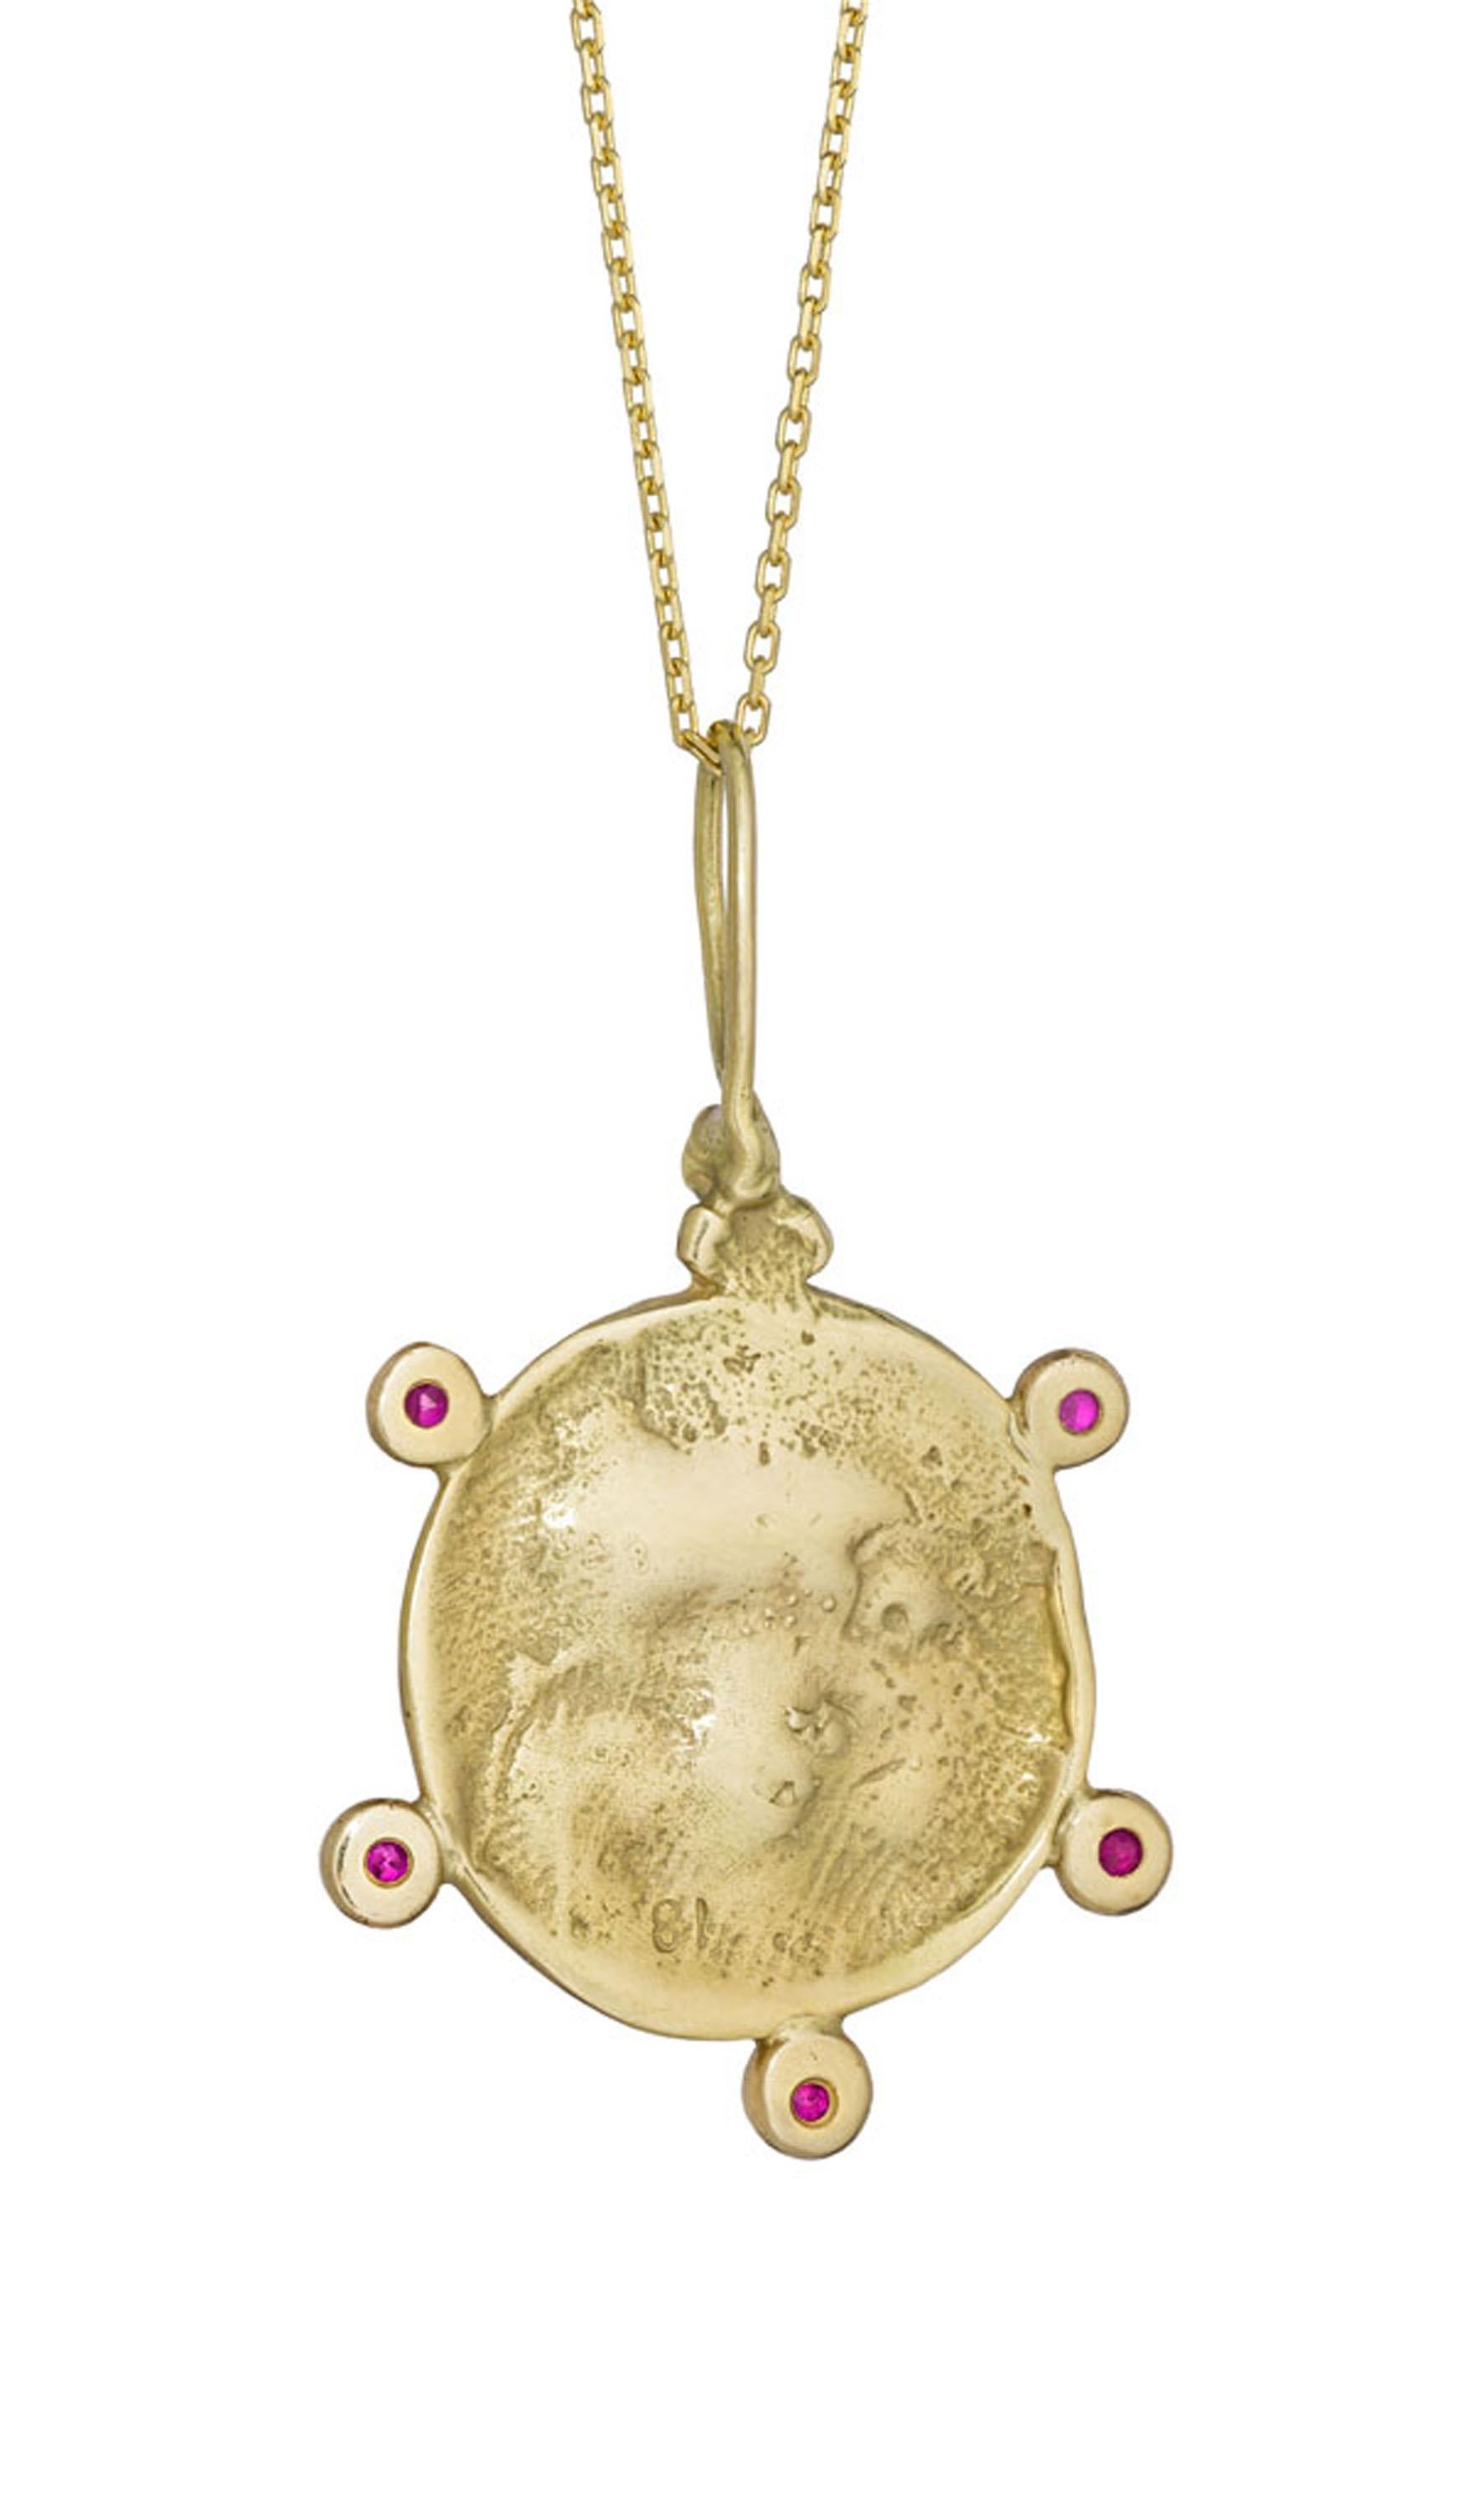 The classic Moon Face pendant captures feminine celestial energy. As the moon governs the movements of the tides in and out, in her dance through the heavens she also represents the ebb and flow of a woman’s divine force. The Ruby Moon Face Pendant